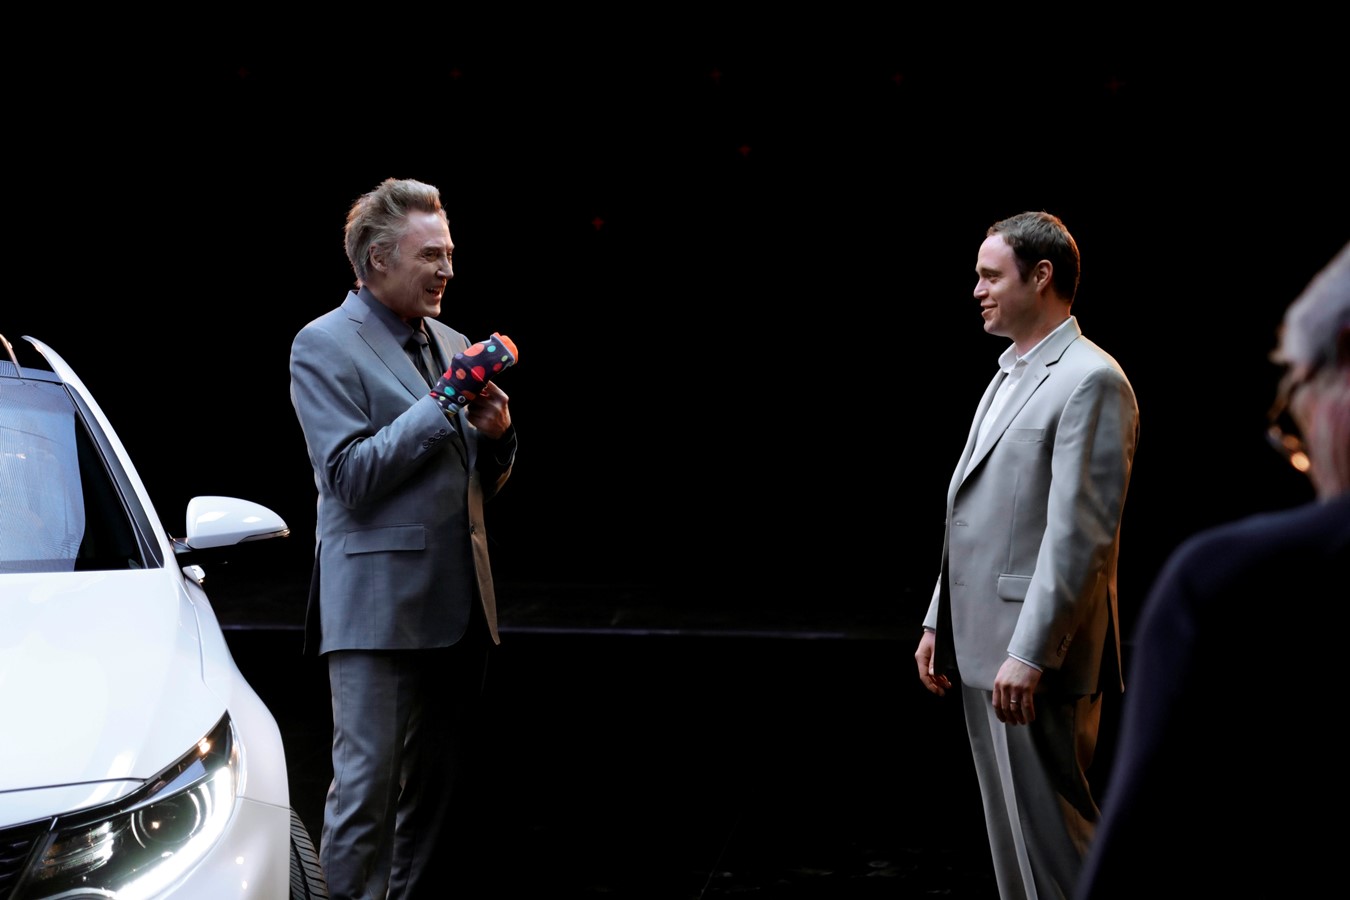 Kia provides behind-the-scenes look at Super Bowl commercial starring Christopher Walken